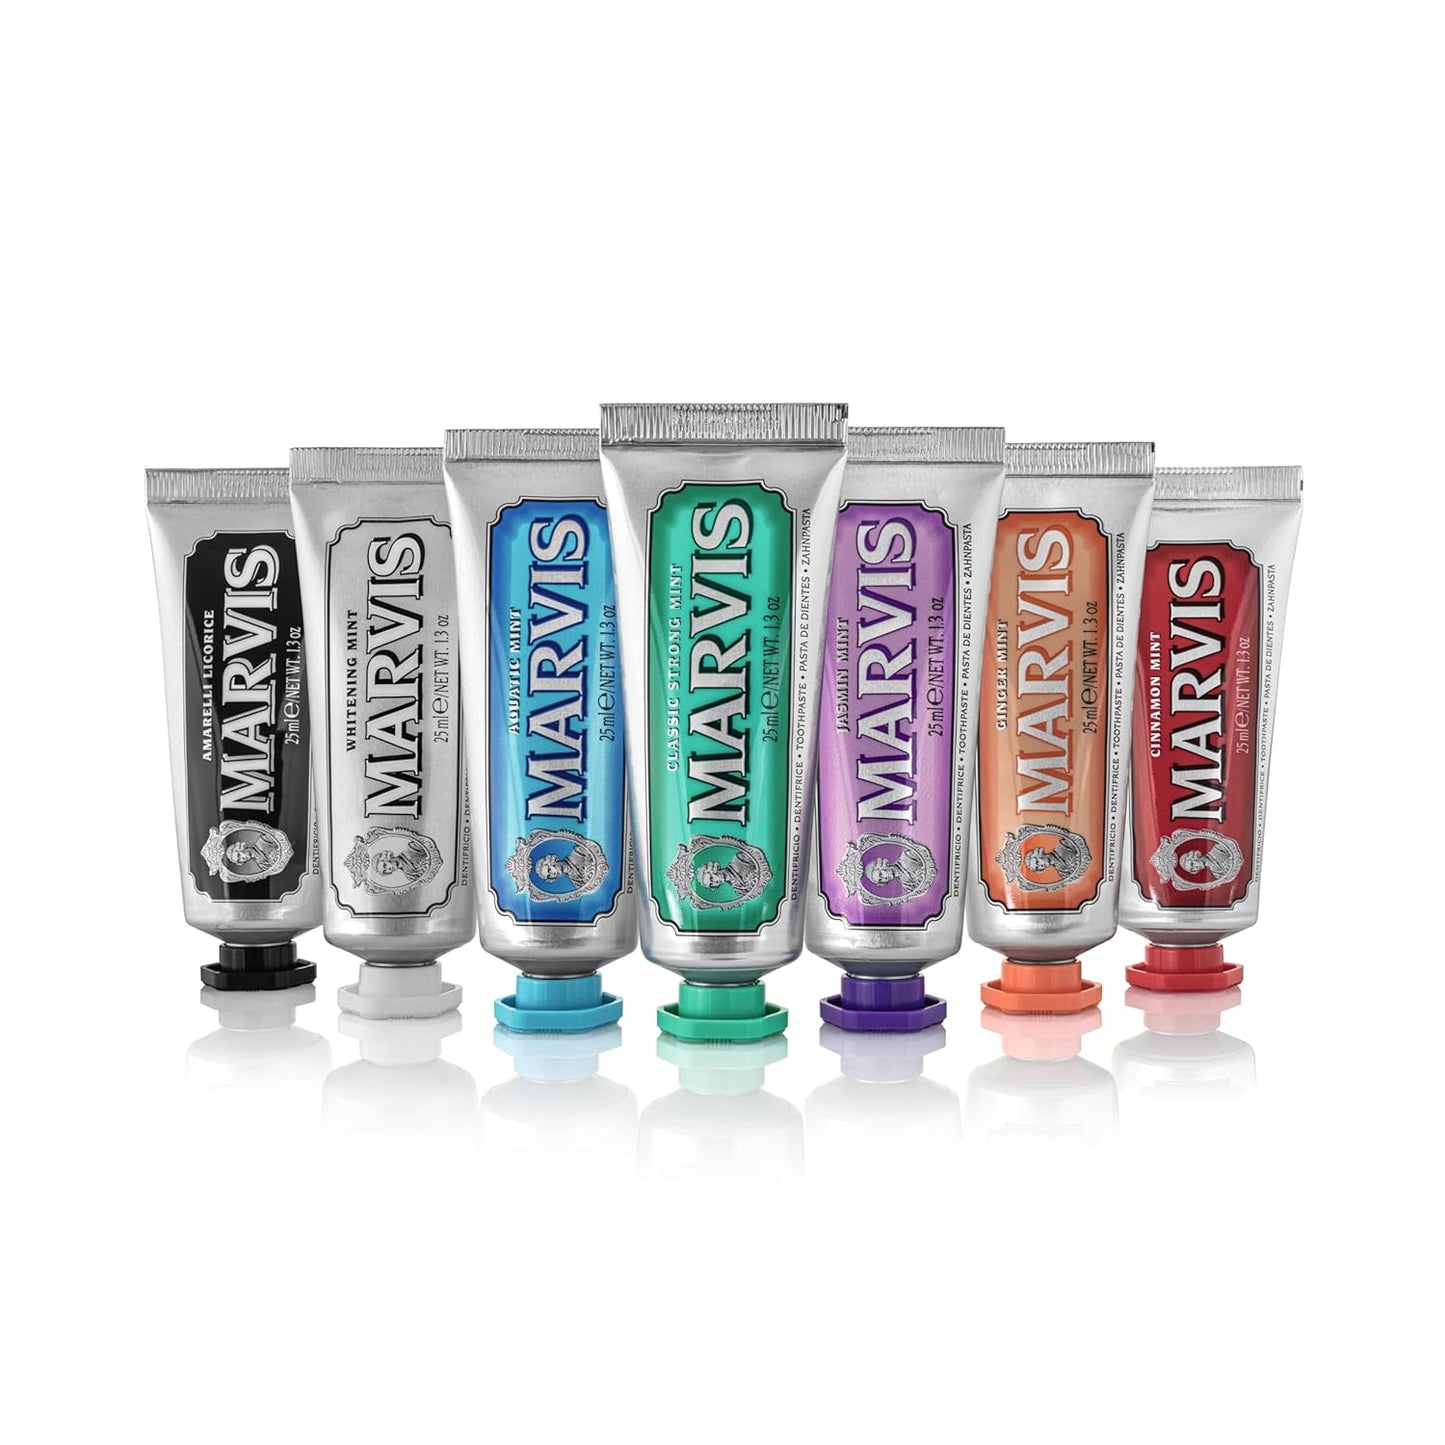 Marvis 7 Flavours Pack - 25 ml x 7 Travel Pack